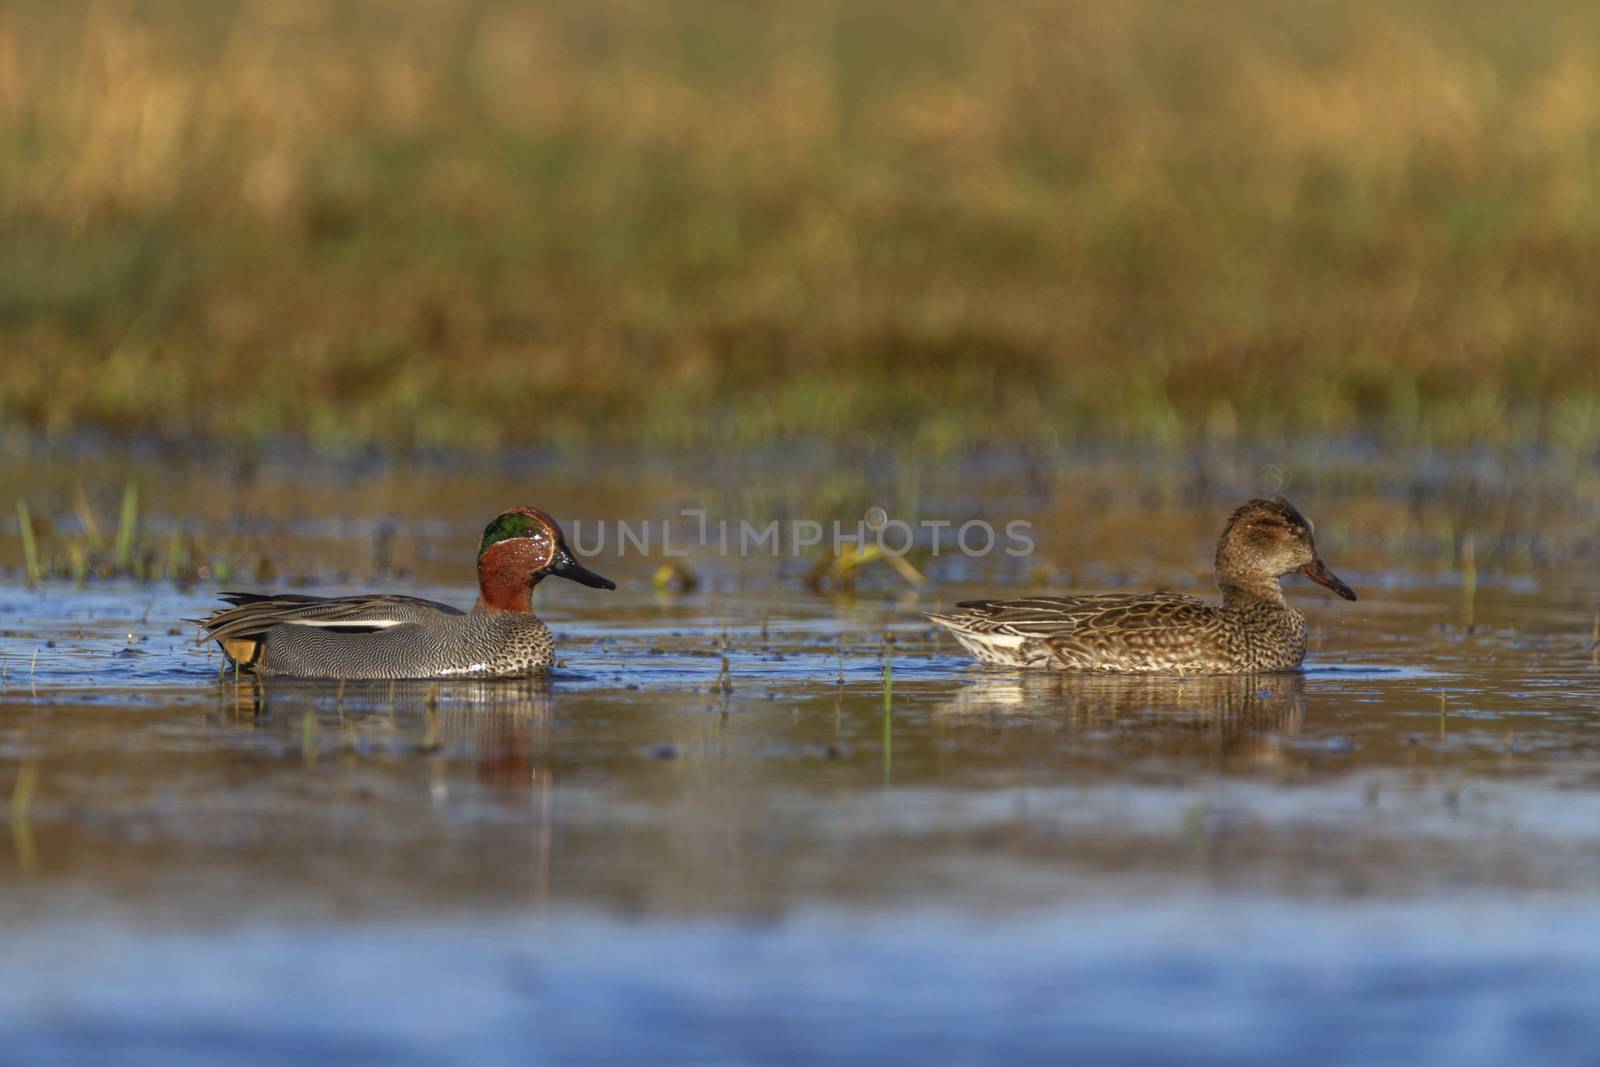 Couple of eurasian teals or common teals, anas crecca, ducks floating on the water